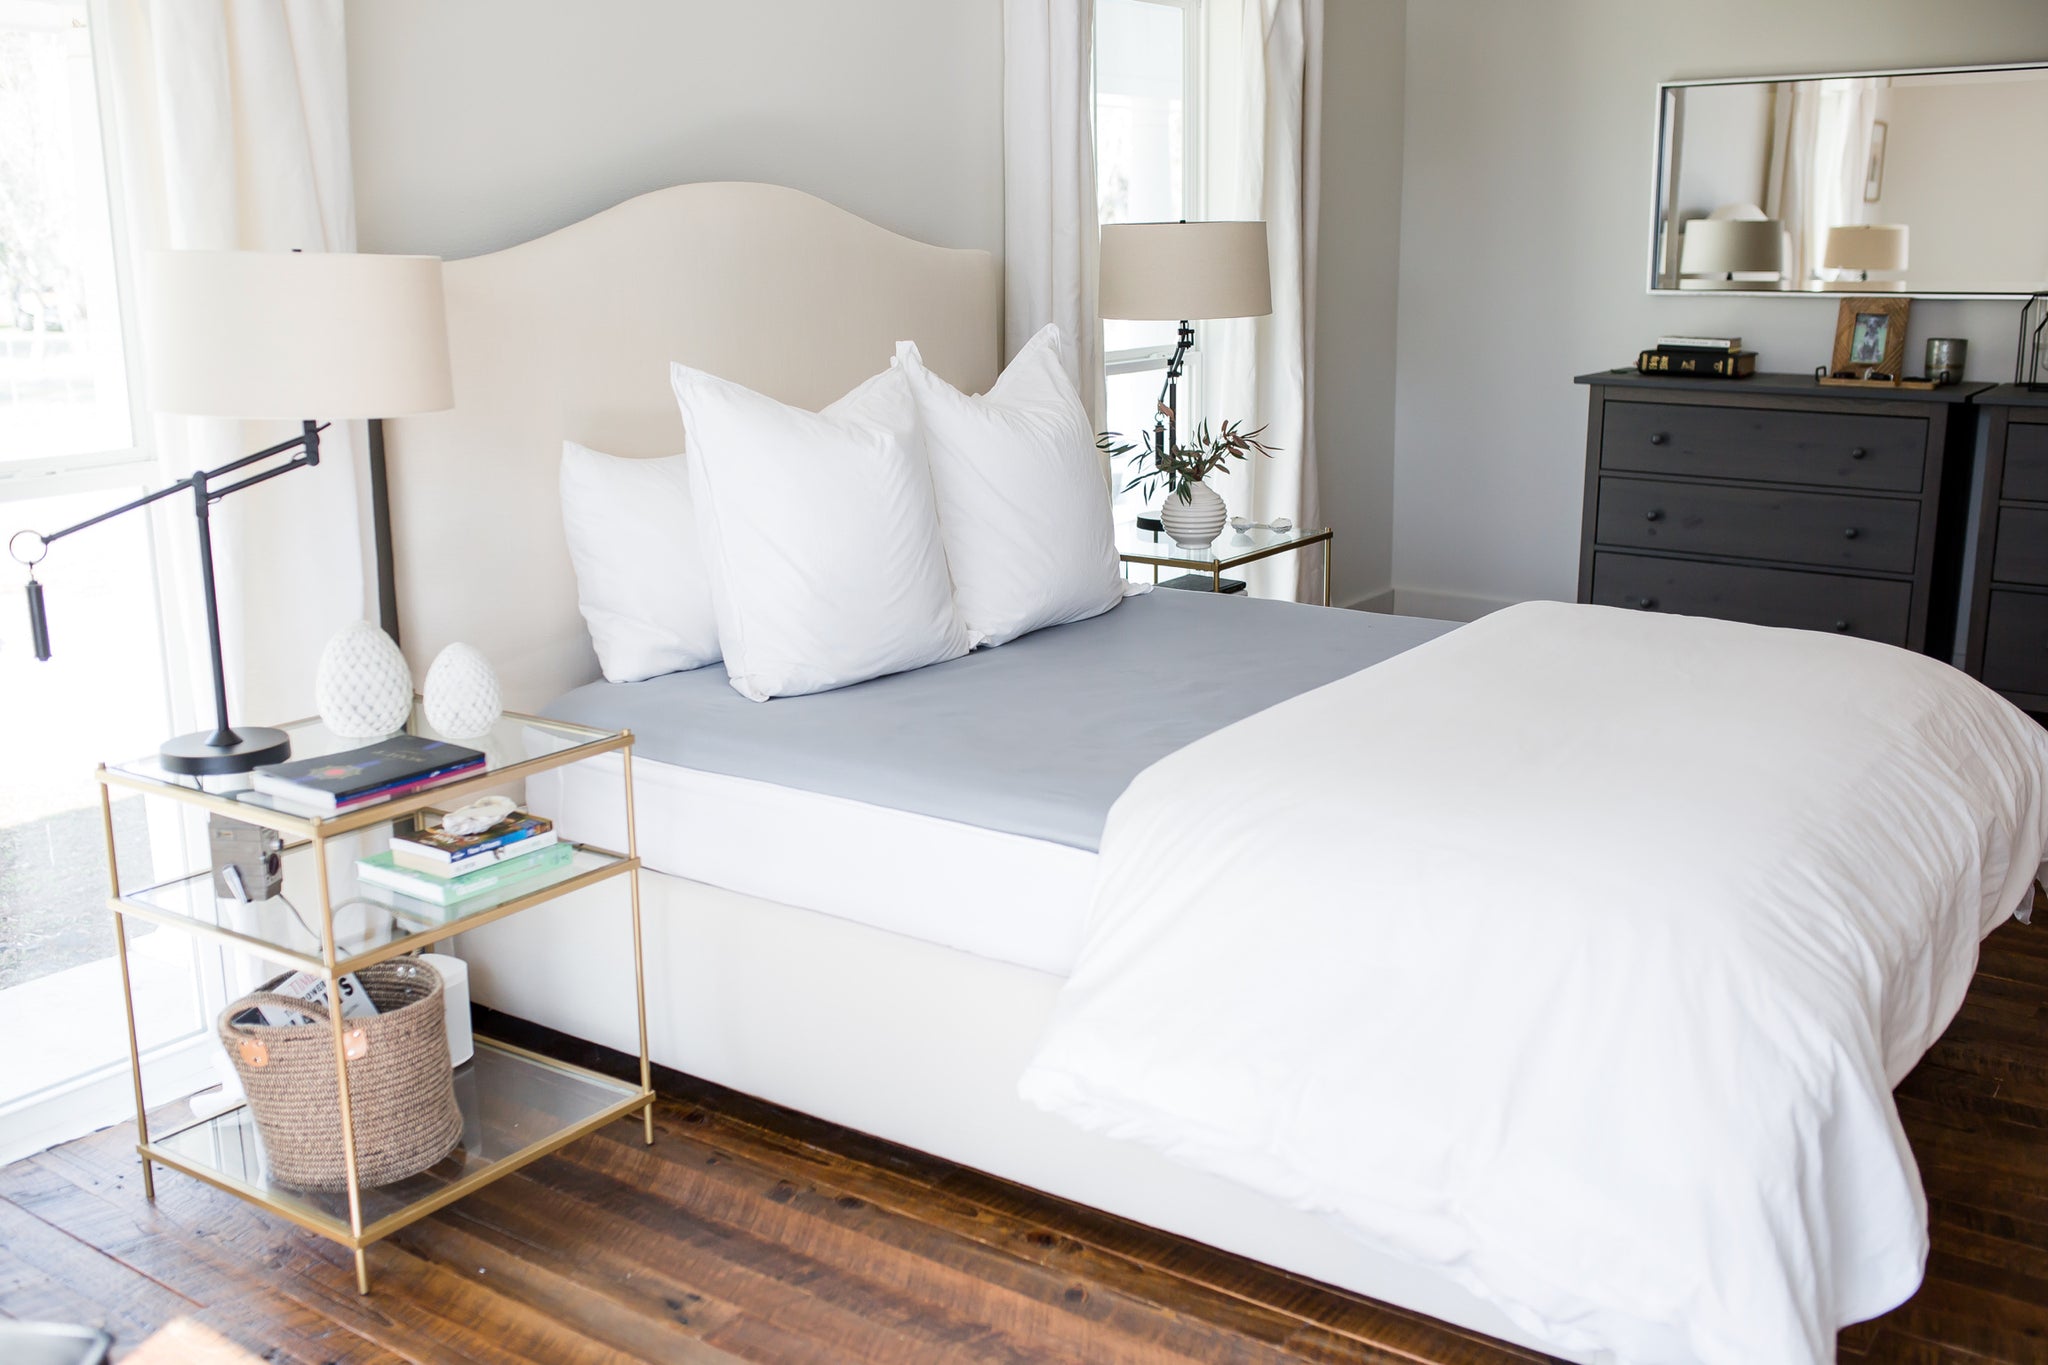 How to Keep Fitted Sheets on a Bed